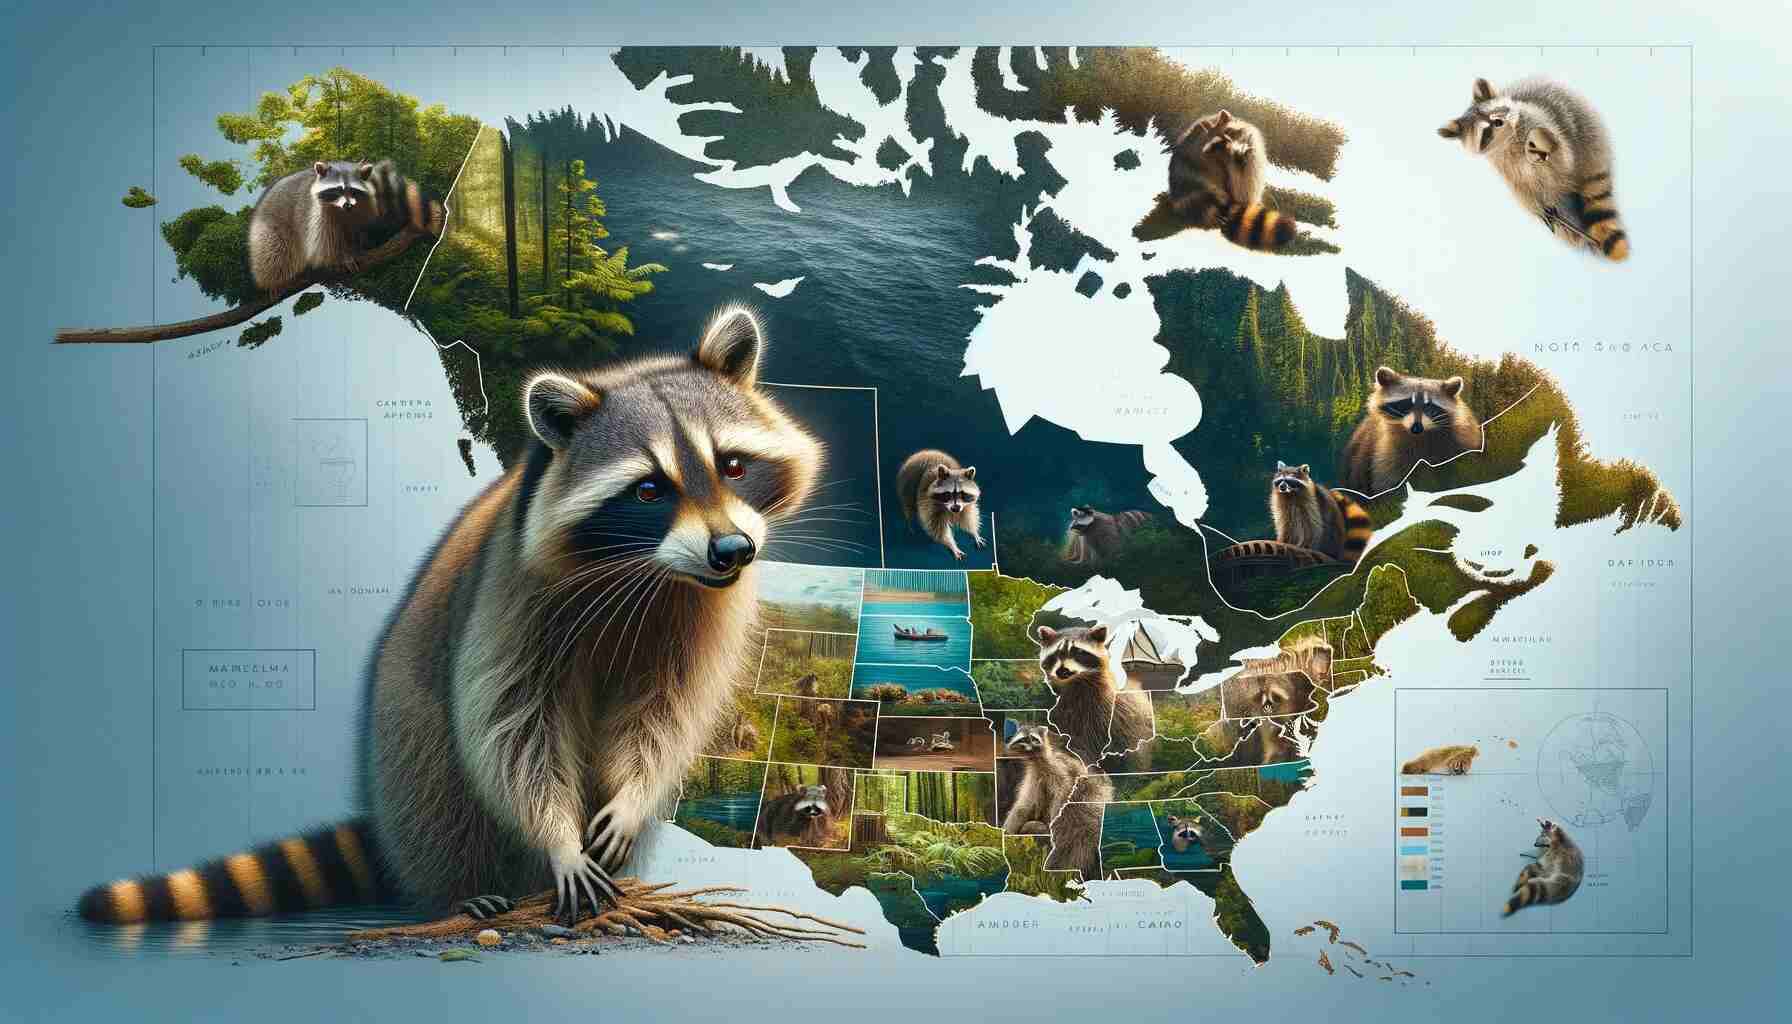 Here is the composite image featuring the habitat and distribution of raccoons. It includes a map showing the natural range of raccoons in North America, from Canada to Panama, and insets displaying raccoons in various habitats like forests, wetlands, and urban areas. This visual highlights the adaptability of raccoons to different environments and their widespread presence across North America.